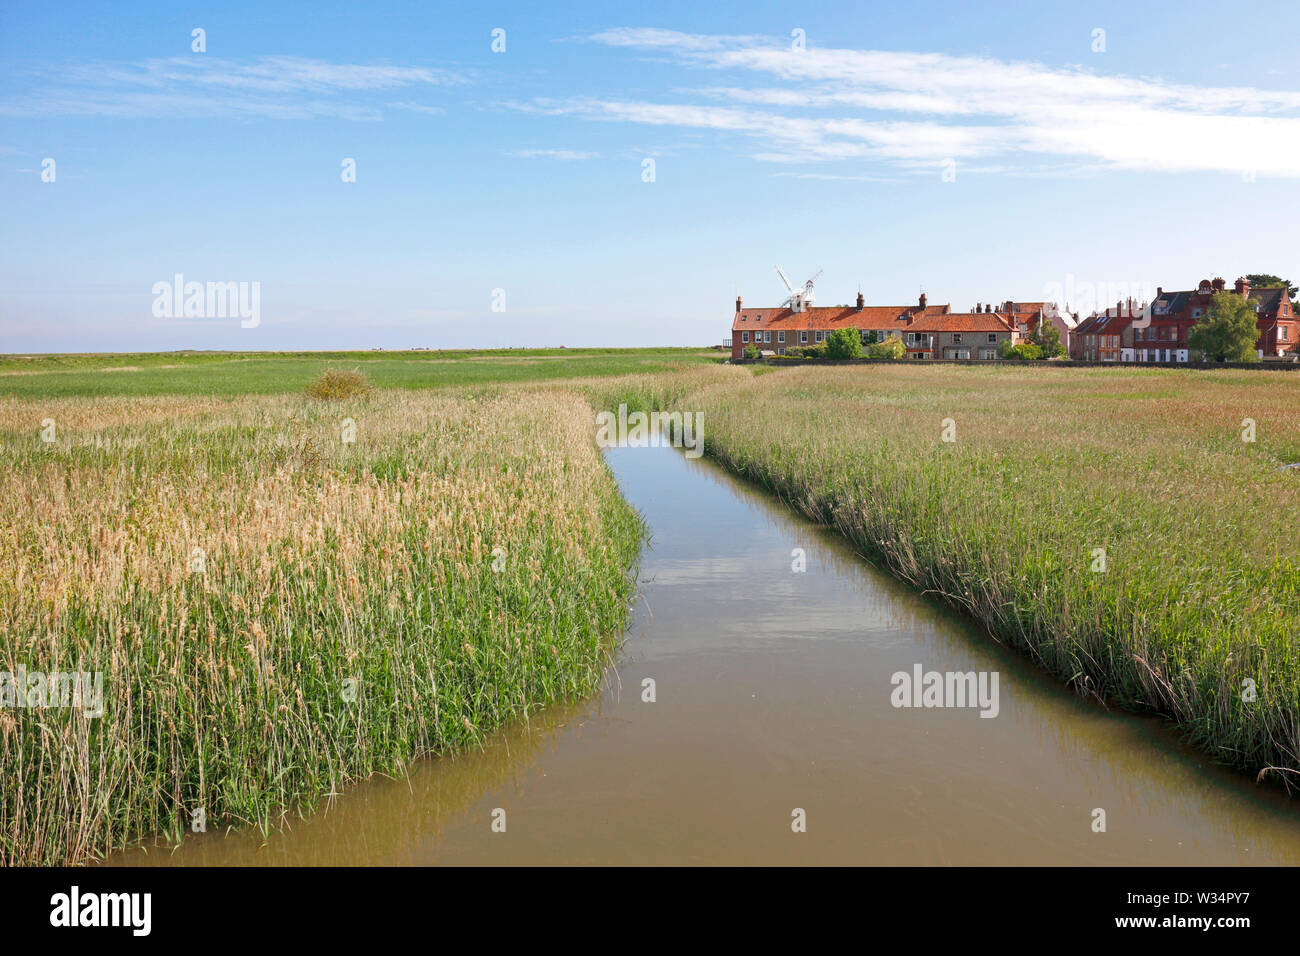 A view of the River Glaven approaching Cley Windmill on the North Norfolk coast at Cley-next-the Sea, Norfolk, England, United Kingdom, Europe. Stock Photo